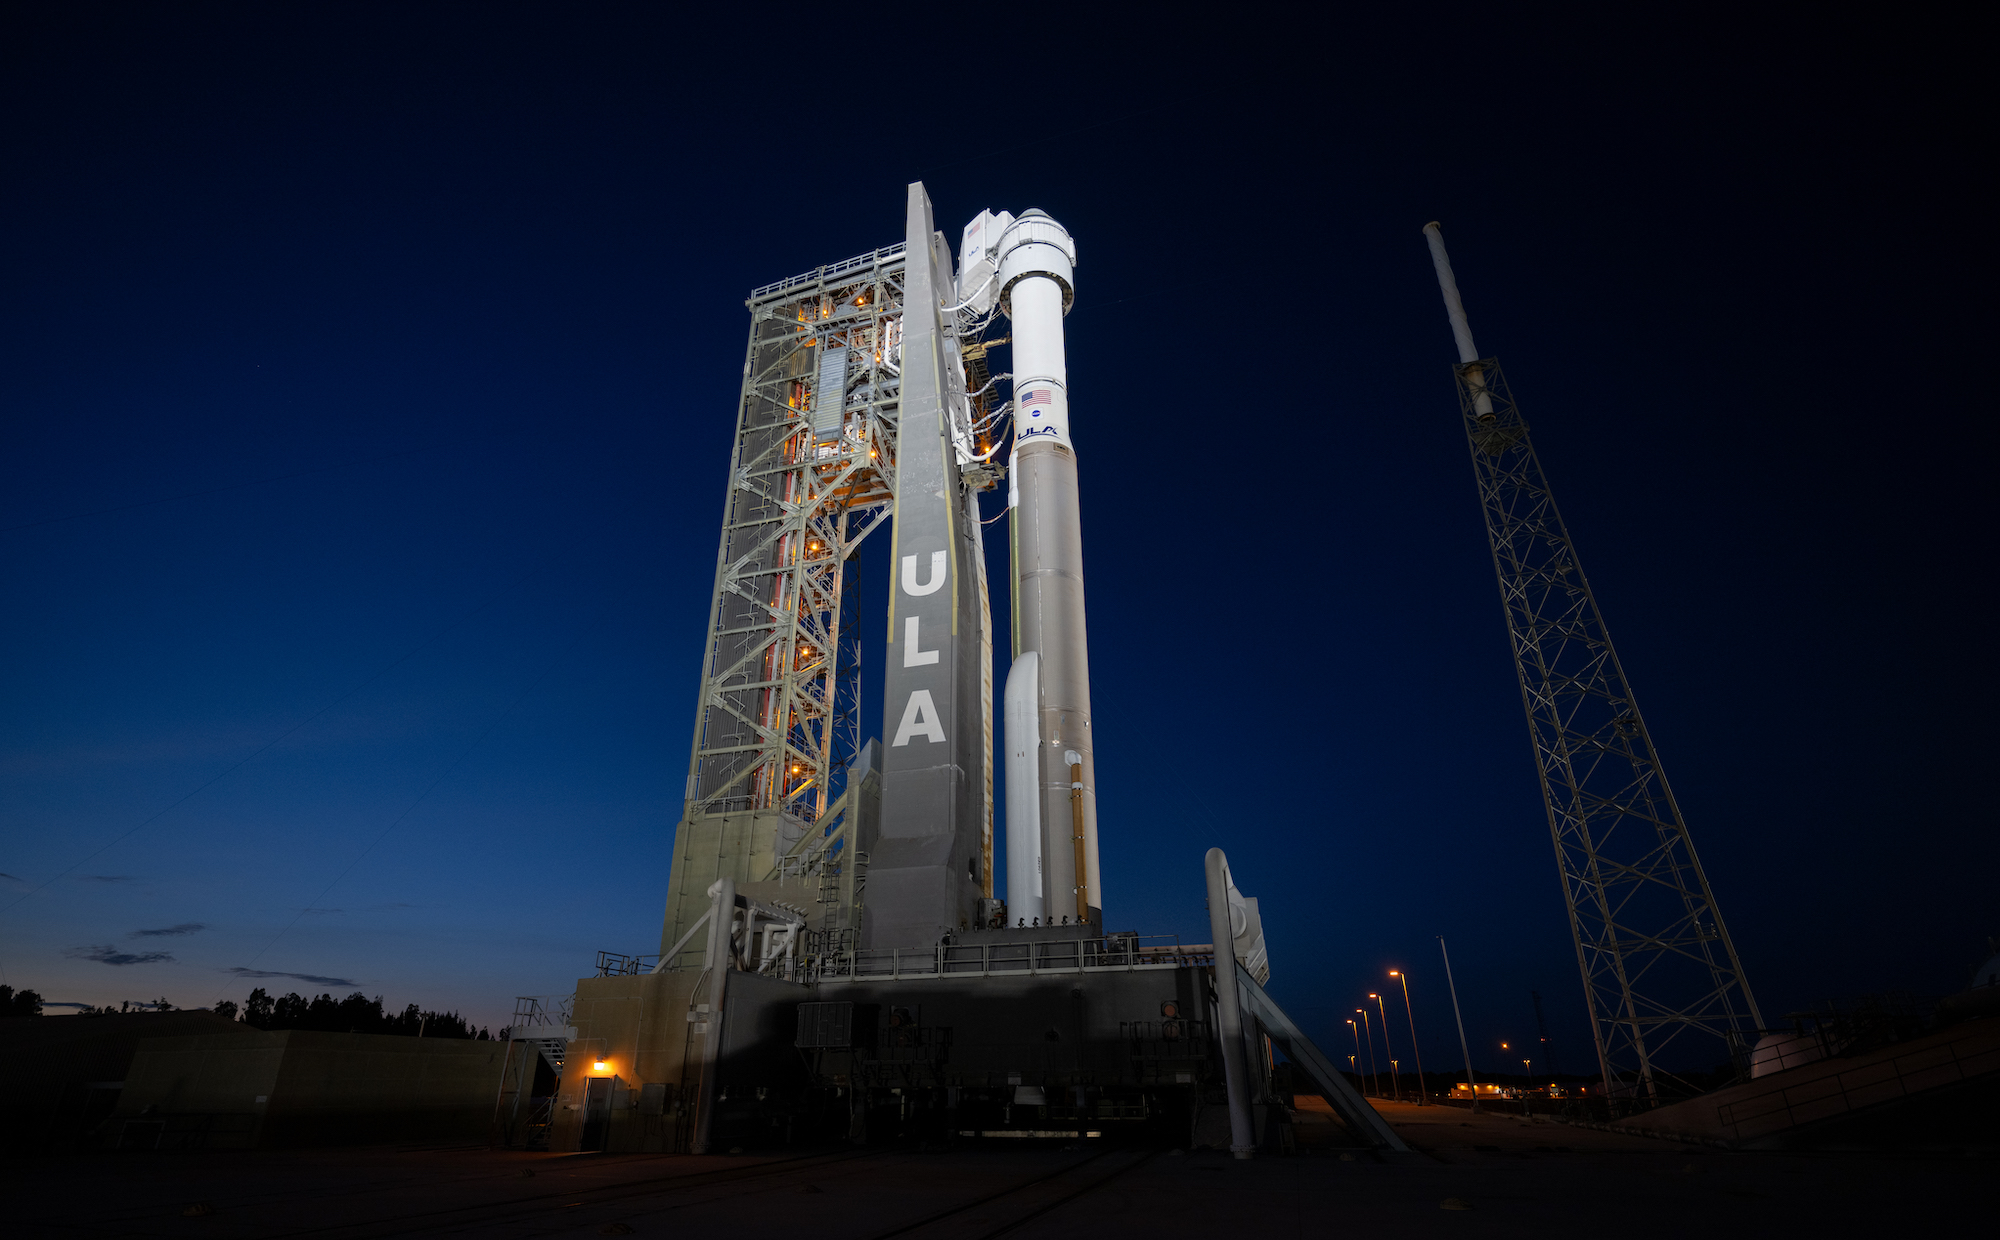 ULA's Atlas V rocket and Boeing Space's Starliner spacecraft on the launchpad at the Kennedy Space Center in Florida.